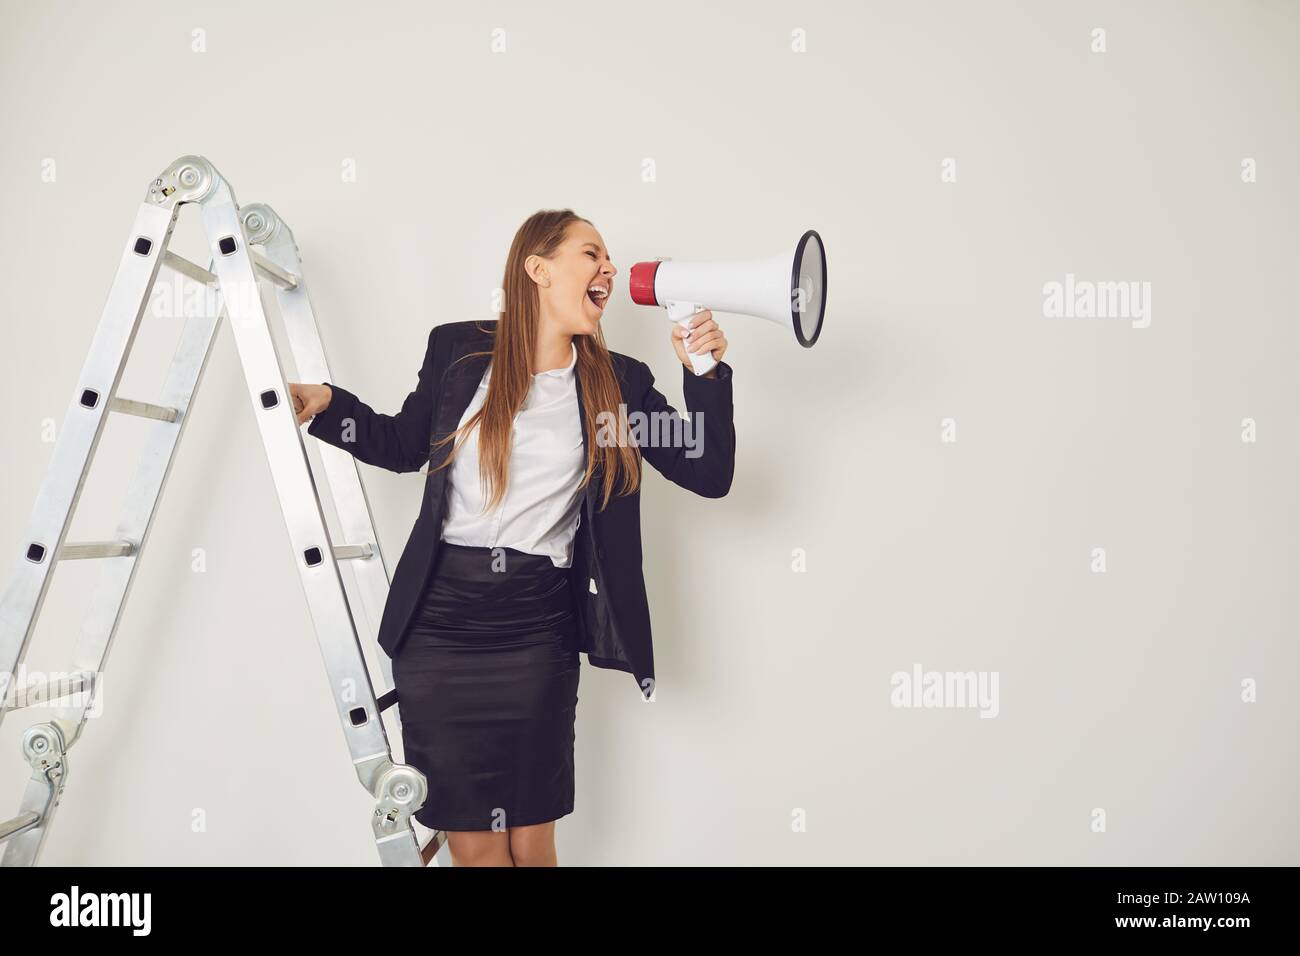 Businesswoman on the stairs with a megaphone in hand shouts on a gray background. Stock Photo